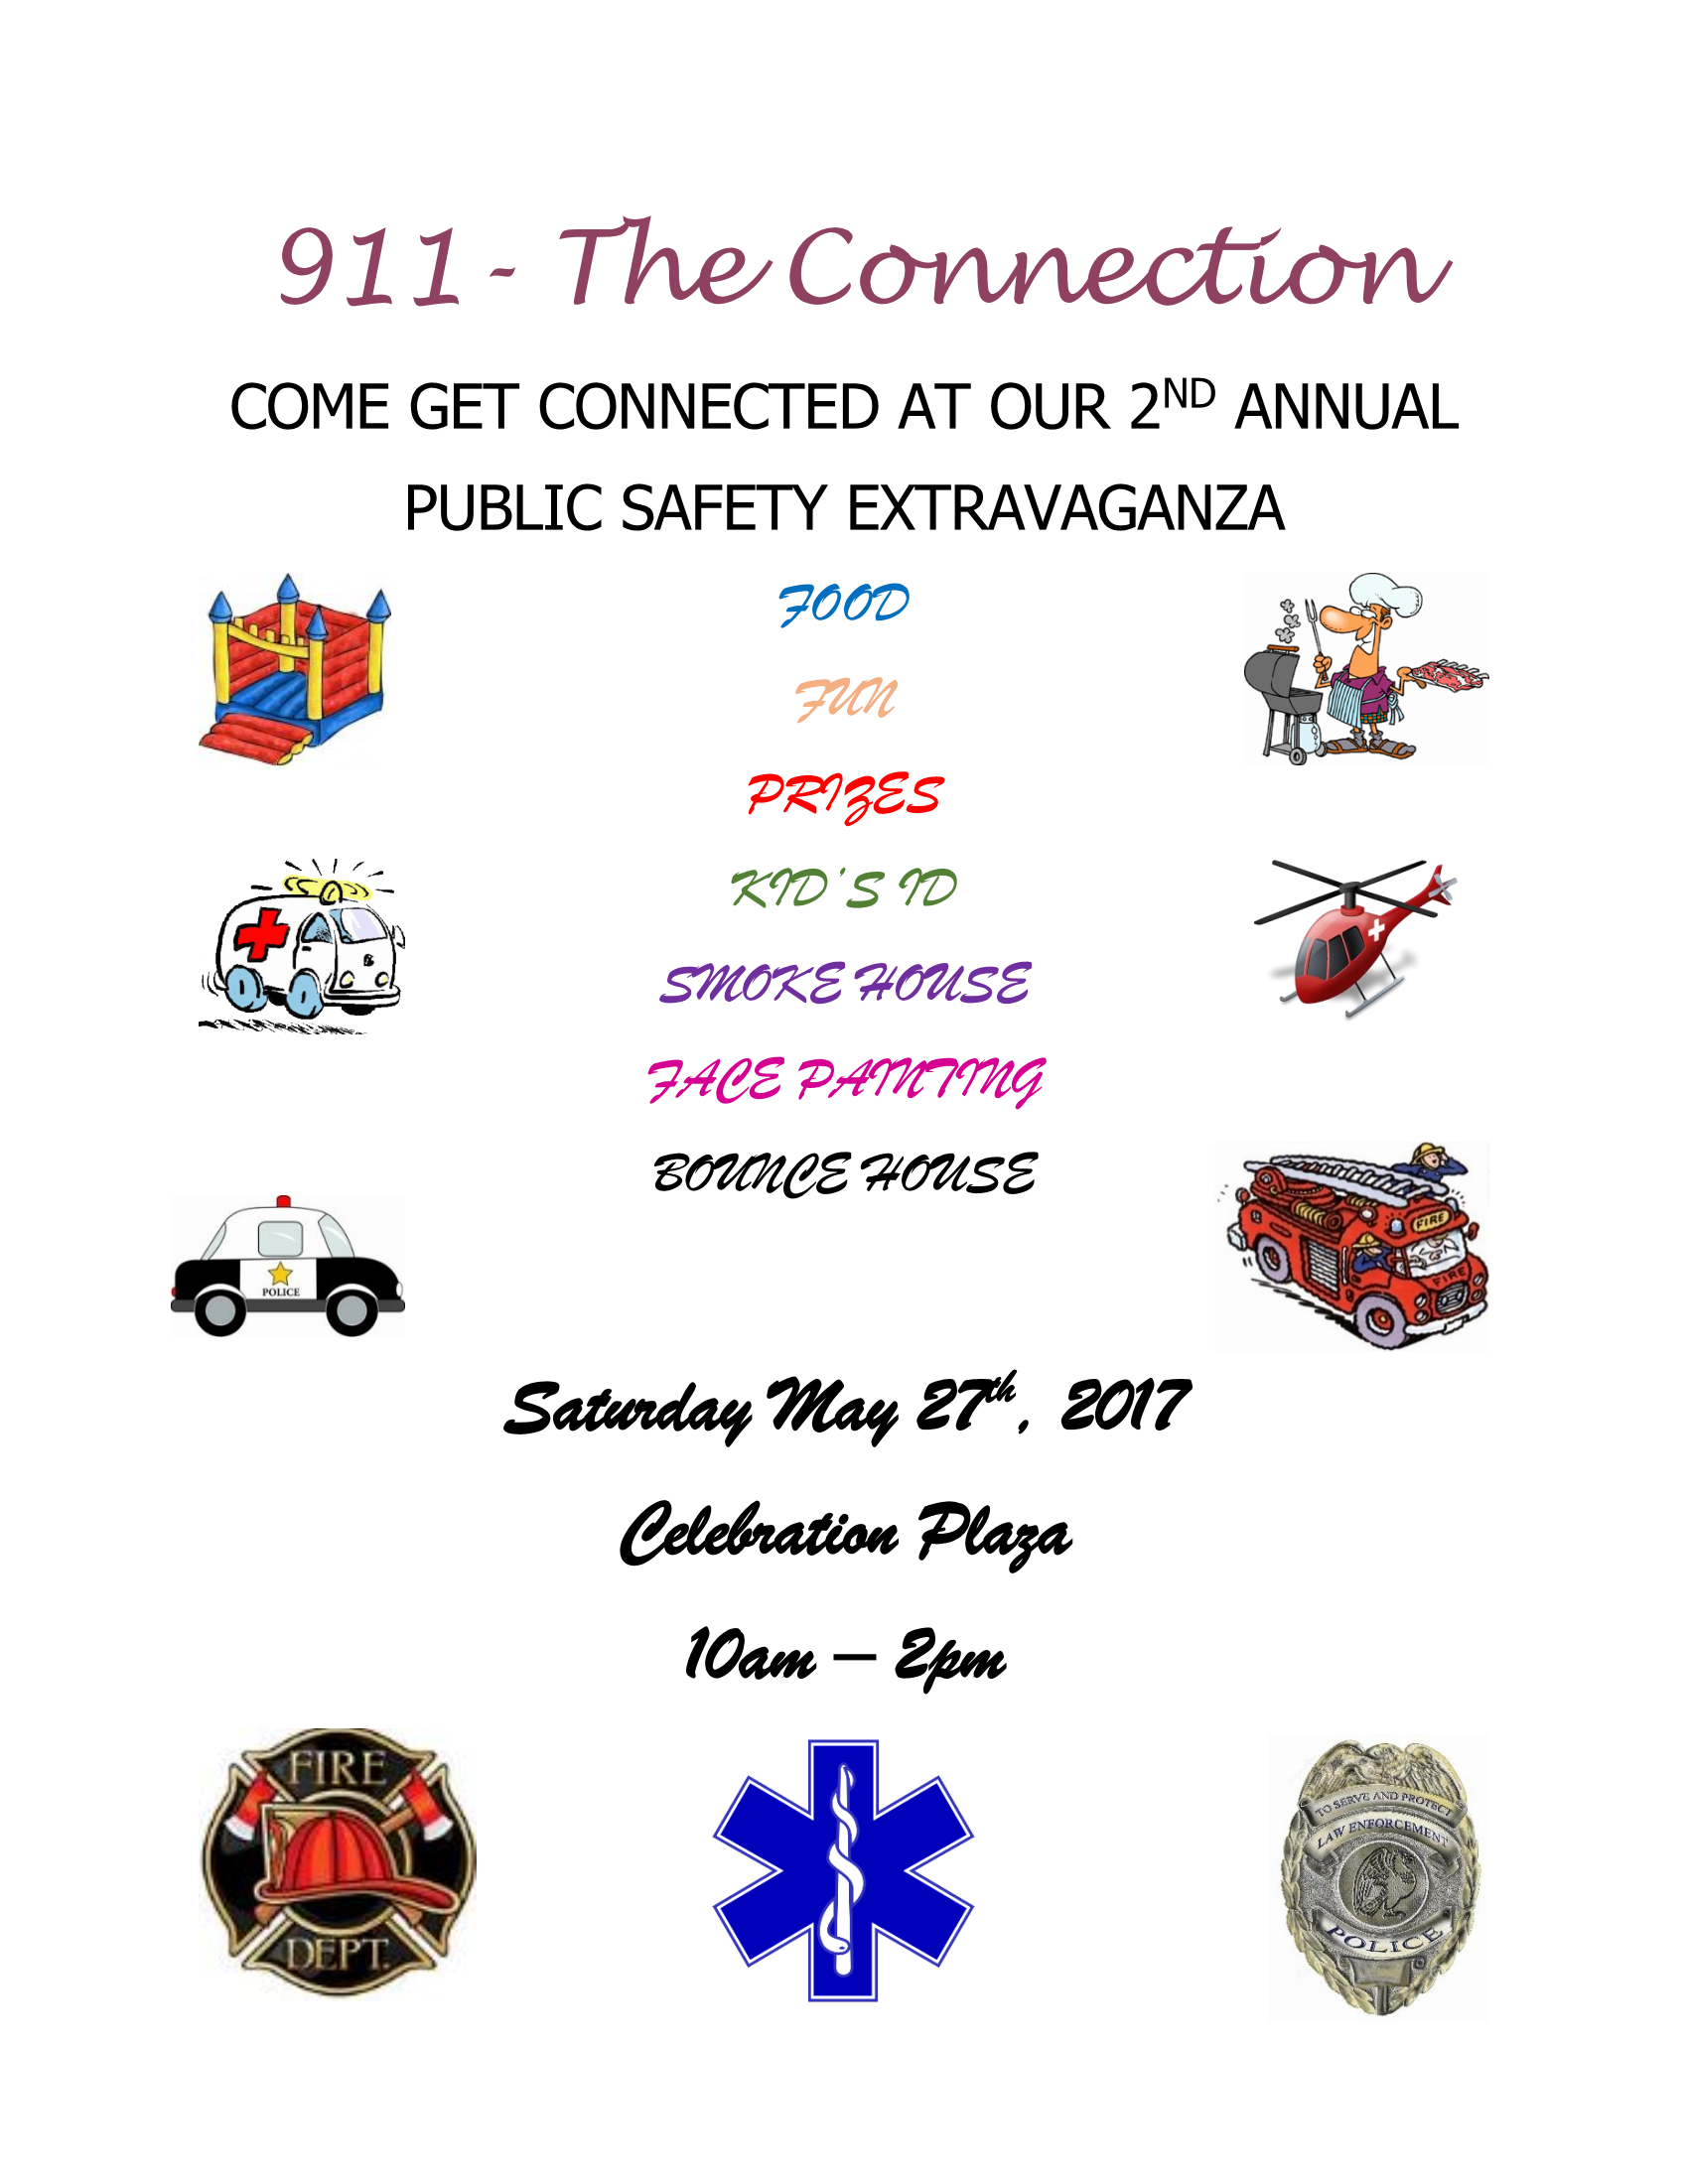 911-Connection 2nd Annual Public Safety Extravaganza Featuring All Public Safety Vehicles Coming May 27th